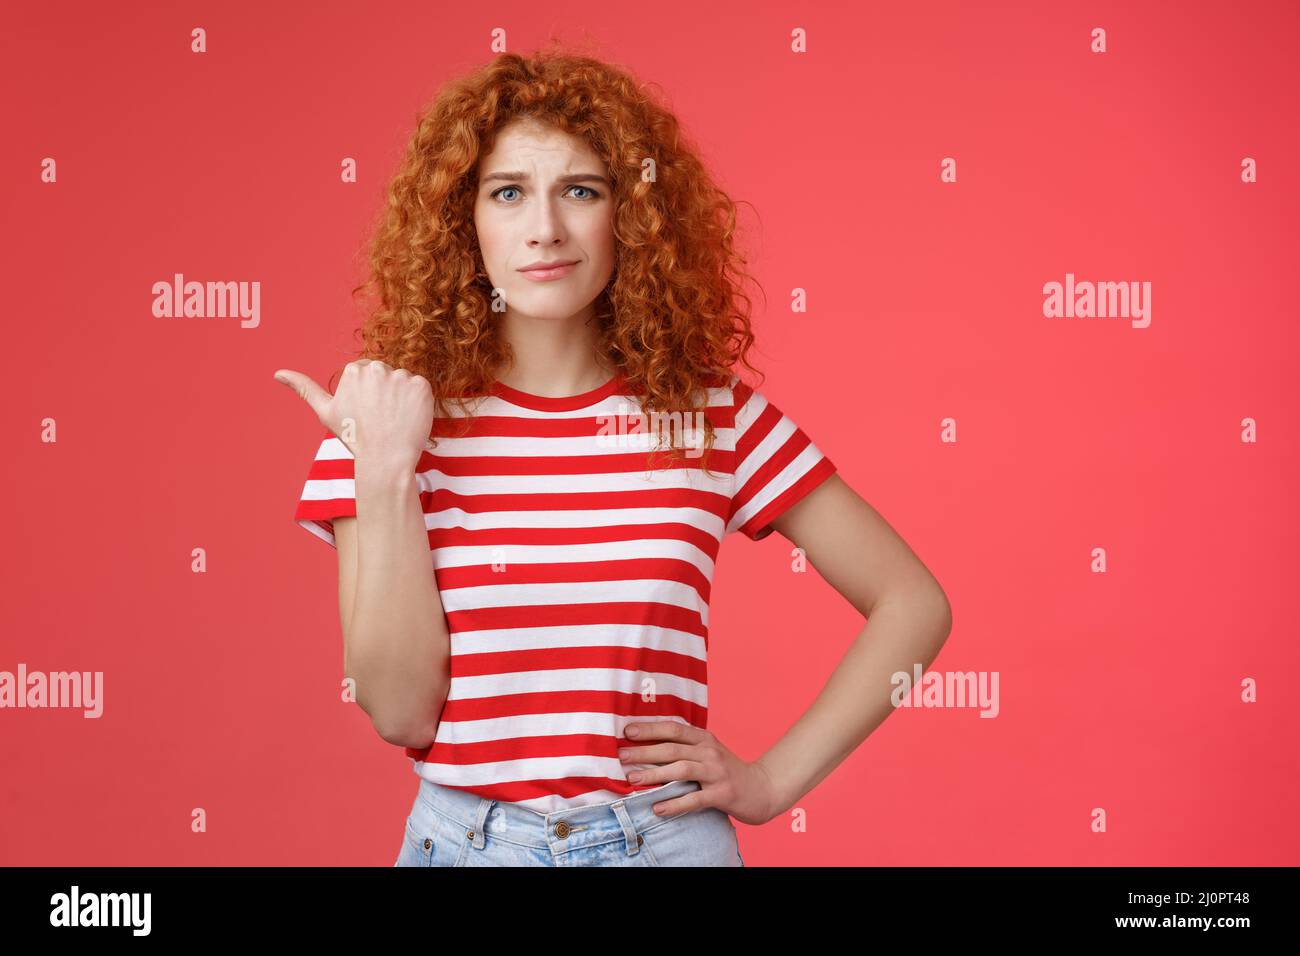 Girl not sure best choice. Doubtful redhead curly woman look suspicious frowning uncertain stare hesitant pointing left thumb un Stock Photo